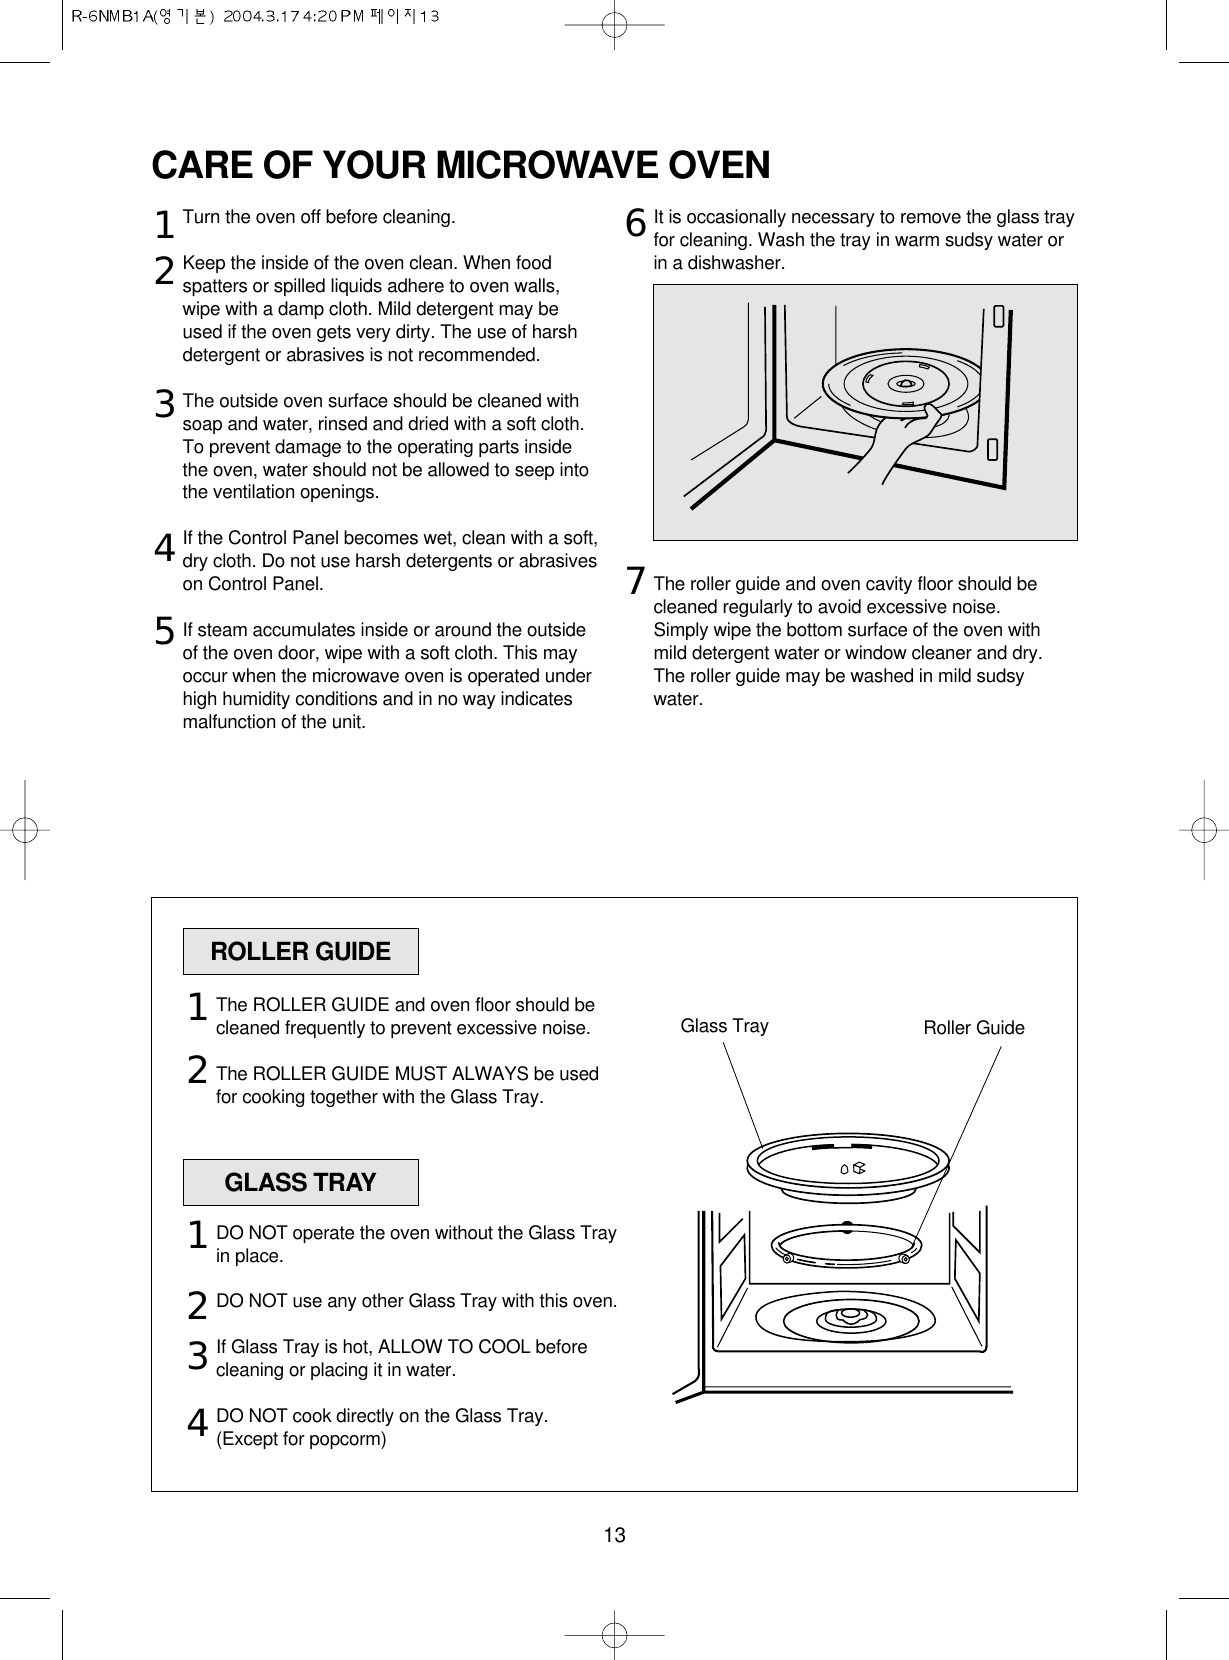 13CARE OF YOUR MICROWAVE OVENTurn the oven off before cleaning.Keep the inside of the oven clean. When foodspatters or spilled liquids adhere to oven walls,wipe with a damp cloth. Mild detergent may beused if the oven gets very dirty. The use of harshdetergent or abrasives is not recommended.The outside oven surface should be cleaned withsoap and water, rinsed and dried with a soft cloth.To prevent damage to the operating parts insidethe oven, water should not be allowed to seep intothe ventilation openings.If the Control Panel becomes wet, clean with a soft,dry cloth. Do not use harsh detergents or abrasiveson Control Panel.If steam accumulates inside or around the outsideof the oven door, wipe with a soft cloth. This mayoccur when the microwave oven is operated underhigh humidity conditions and in no way indicatesmalfunction of the unit.It is occasionally necessary to remove the glass trayfor cleaning. Wash the tray in warm sudsy water orin a dishwasher.The roller guide and oven cavity floor should becleaned regularly to avoid excessive noise. Simply wipe the bottom surface of the oven withmild detergent water or window cleaner and dry.The roller guide may be washed in mild sudsywater.1234567ROLLER GUIDEGLASS TRAYGlass Tray Roller GuideThe ROLLER GUIDE and oven floor should becleaned frequently to prevent excessive noise.The ROLLER GUIDE MUST ALWAYS be usedfor cooking together with the Glass Tray.DO NOT operate the oven without the Glass Trayin place.DO NOT use any other Glass Tray with this oven.If Glass Tray is hot, ALLOW TO COOL beforecleaning or placing it in water.DO NOT cook directly on the Glass Tray.(Except for popcorm)121234